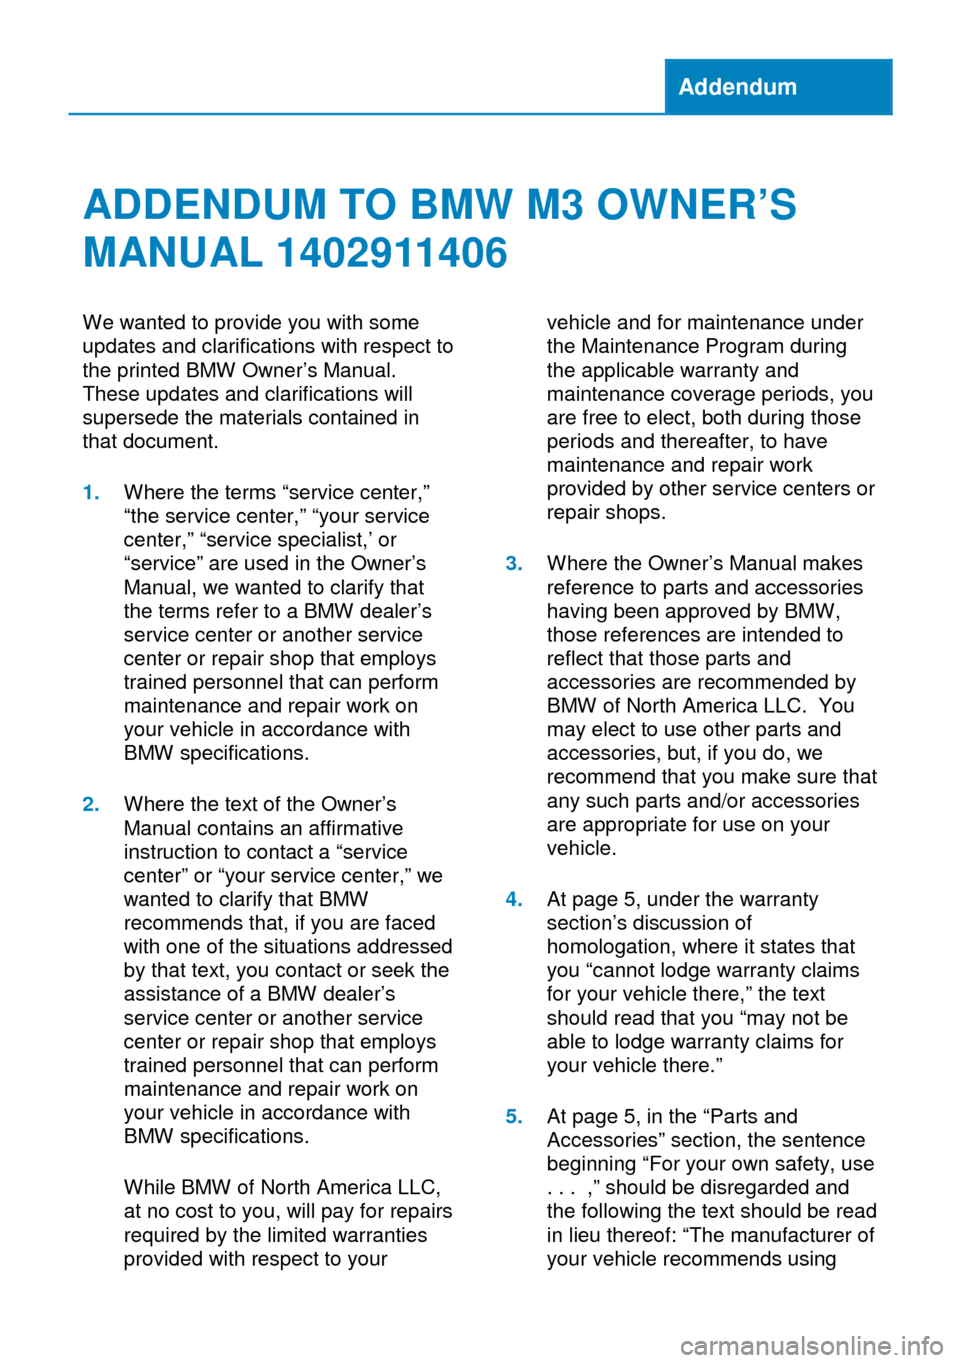 BMW M3 CONVERTIBLE 2013 E93 Owners Manual Addendum
ADDENDUM TO BMW M3 OWNER’S
MANUAL 1402911406
We wanted to provide you with some
updates and clarifications with respect to
the printed BMW Owner’s Manual.
These updates and clarifications